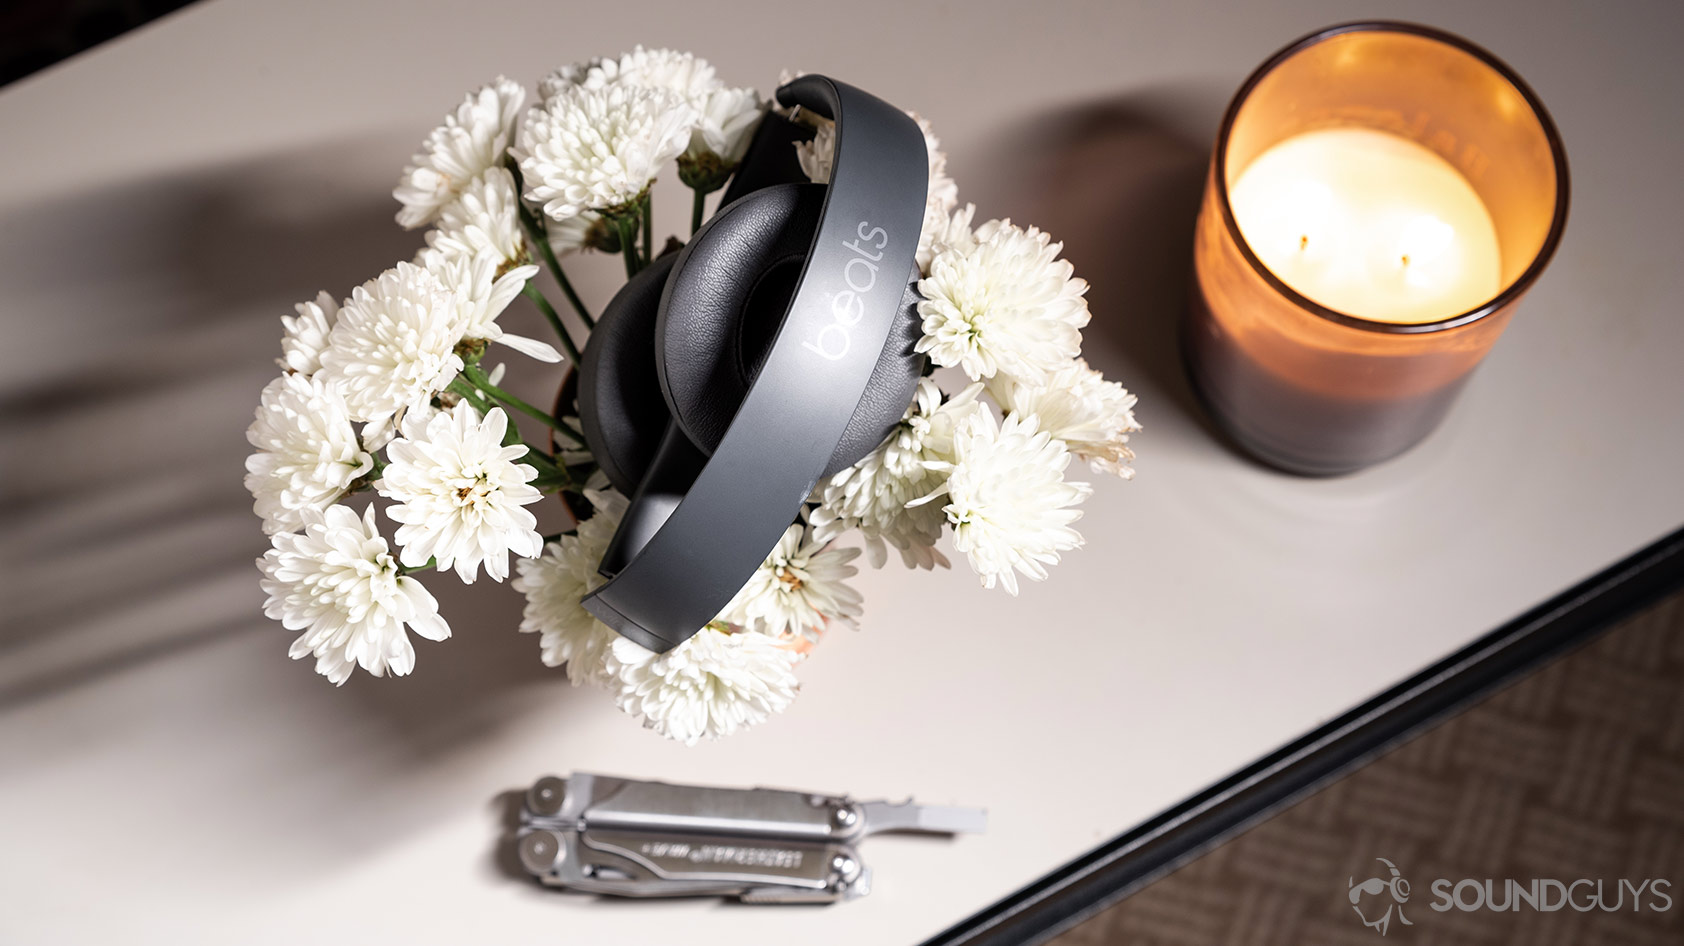 The Beats Solo3 Wirless headphones folded atop a bed of flowers with a candle and multitool.